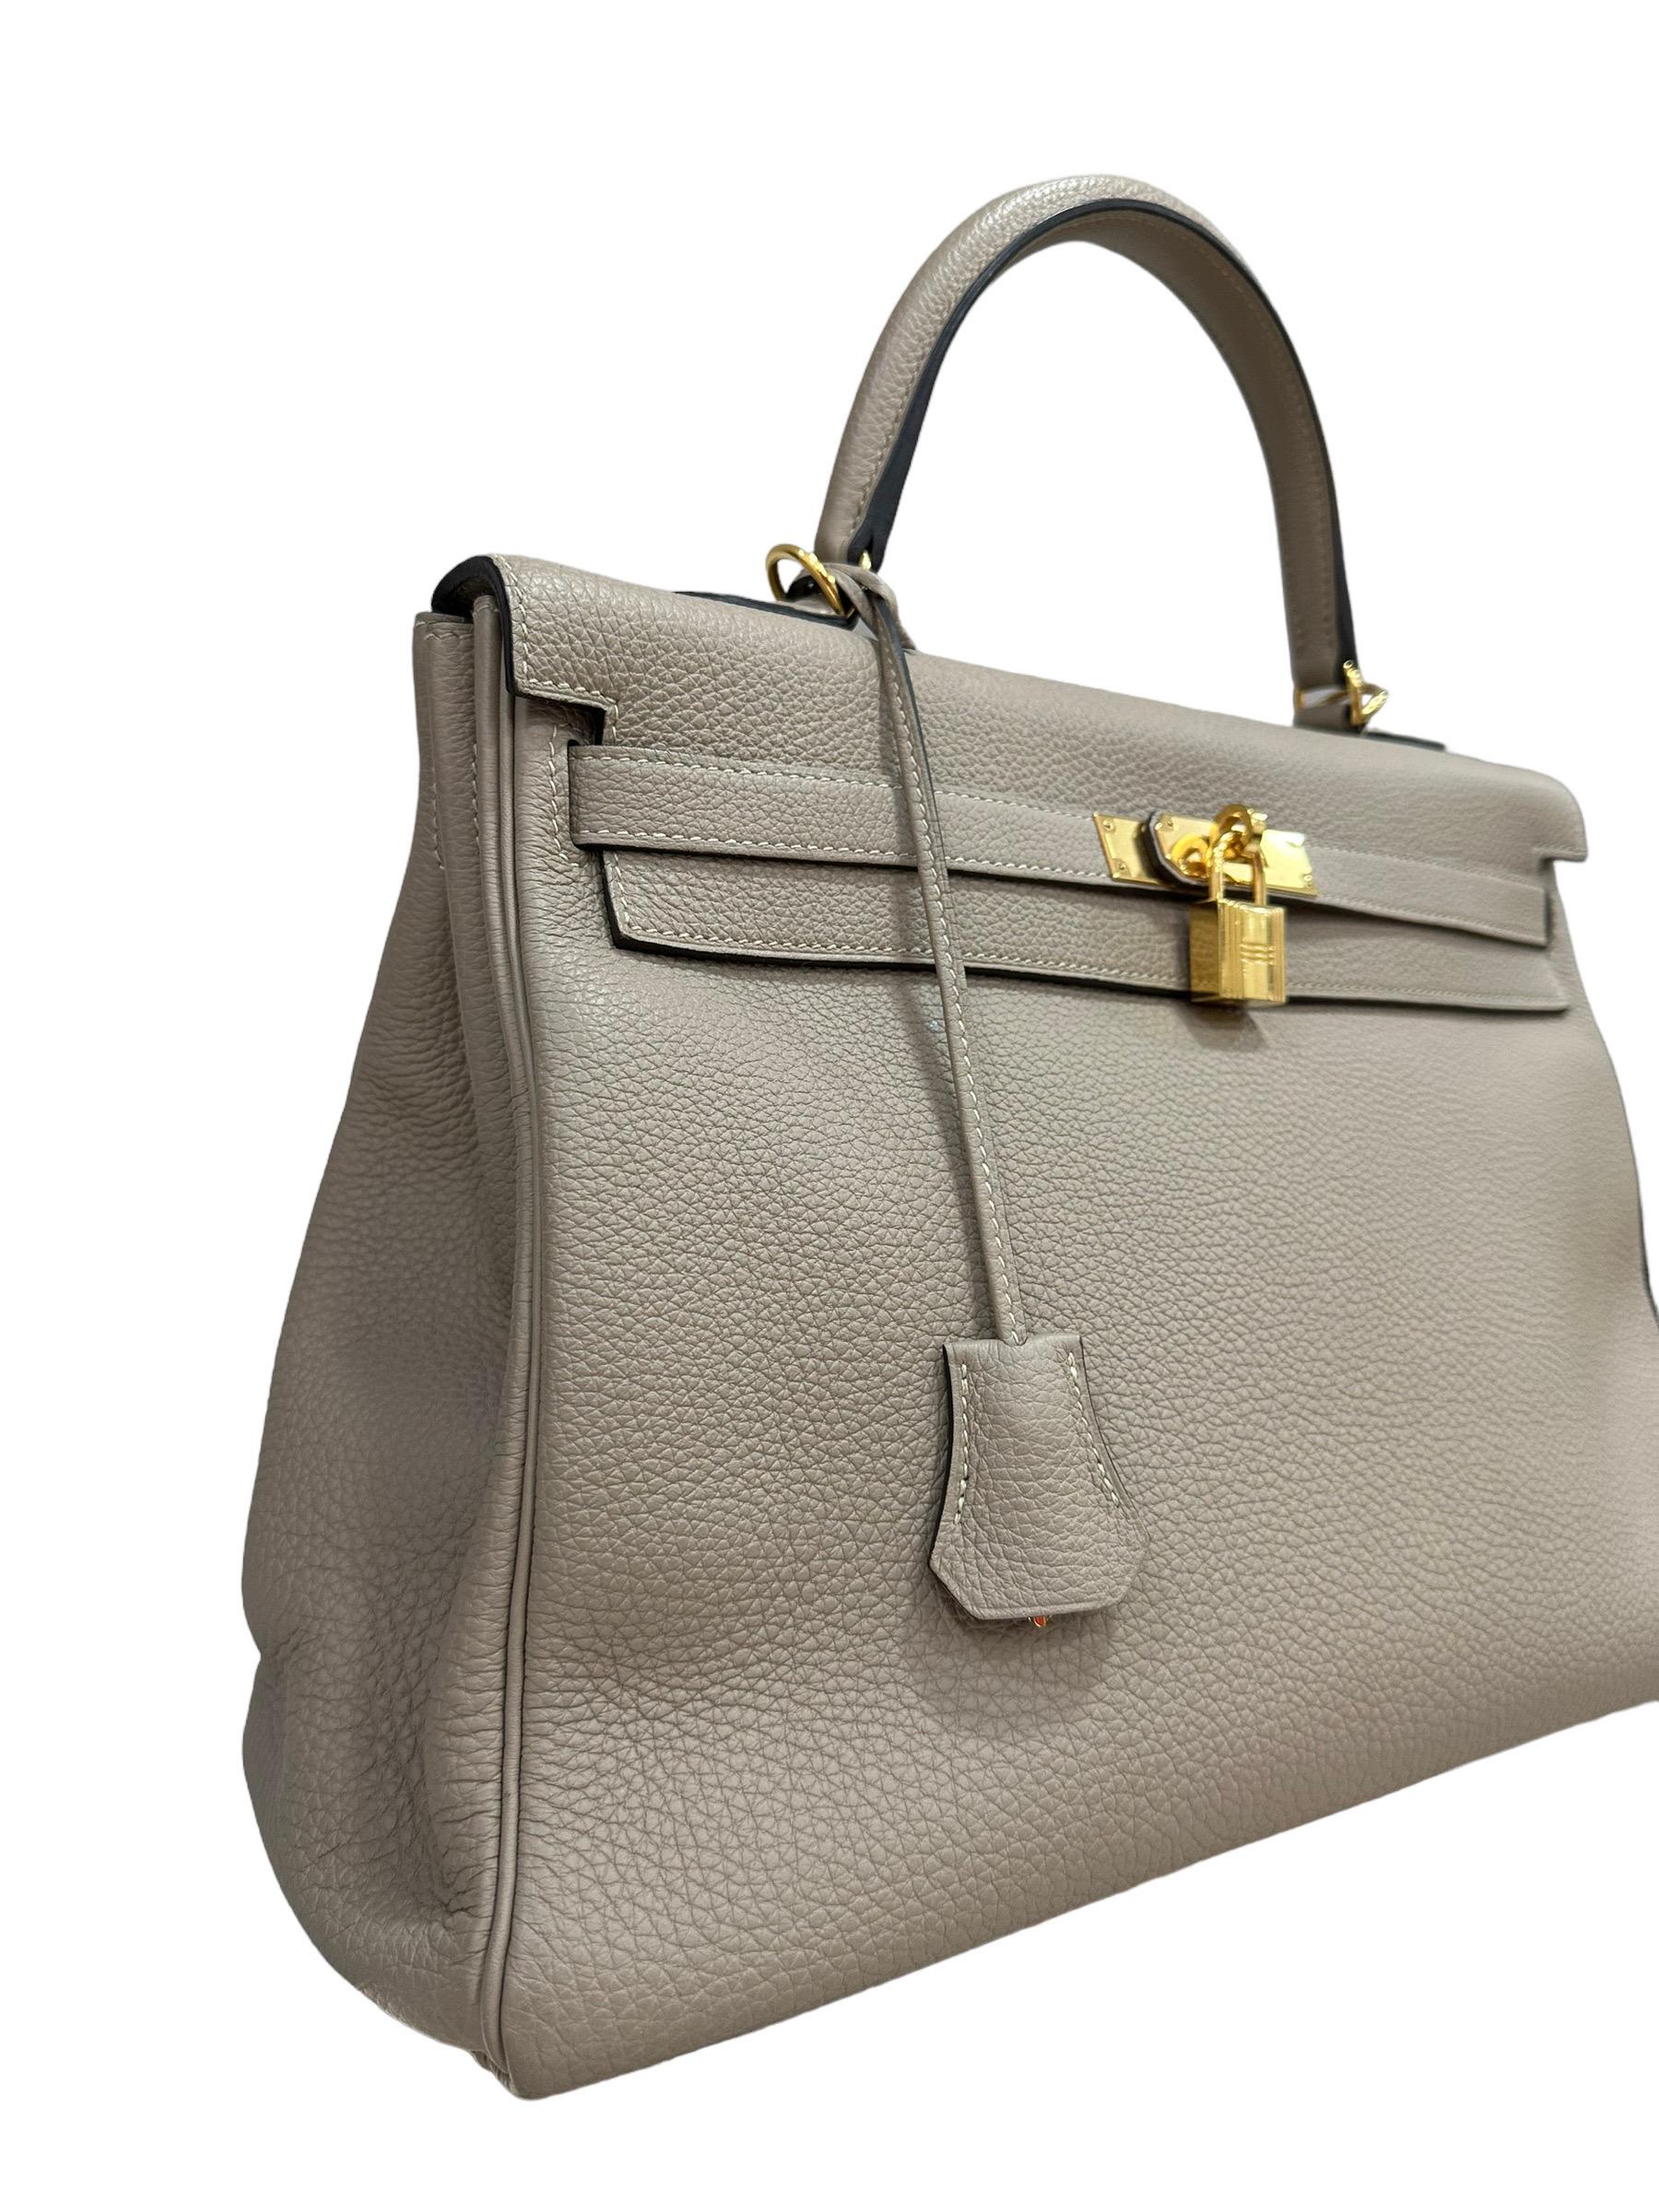 Hermès Kelly 35 Togo Gris Tourterelle In Good Condition For Sale In Torre Del Greco, IT